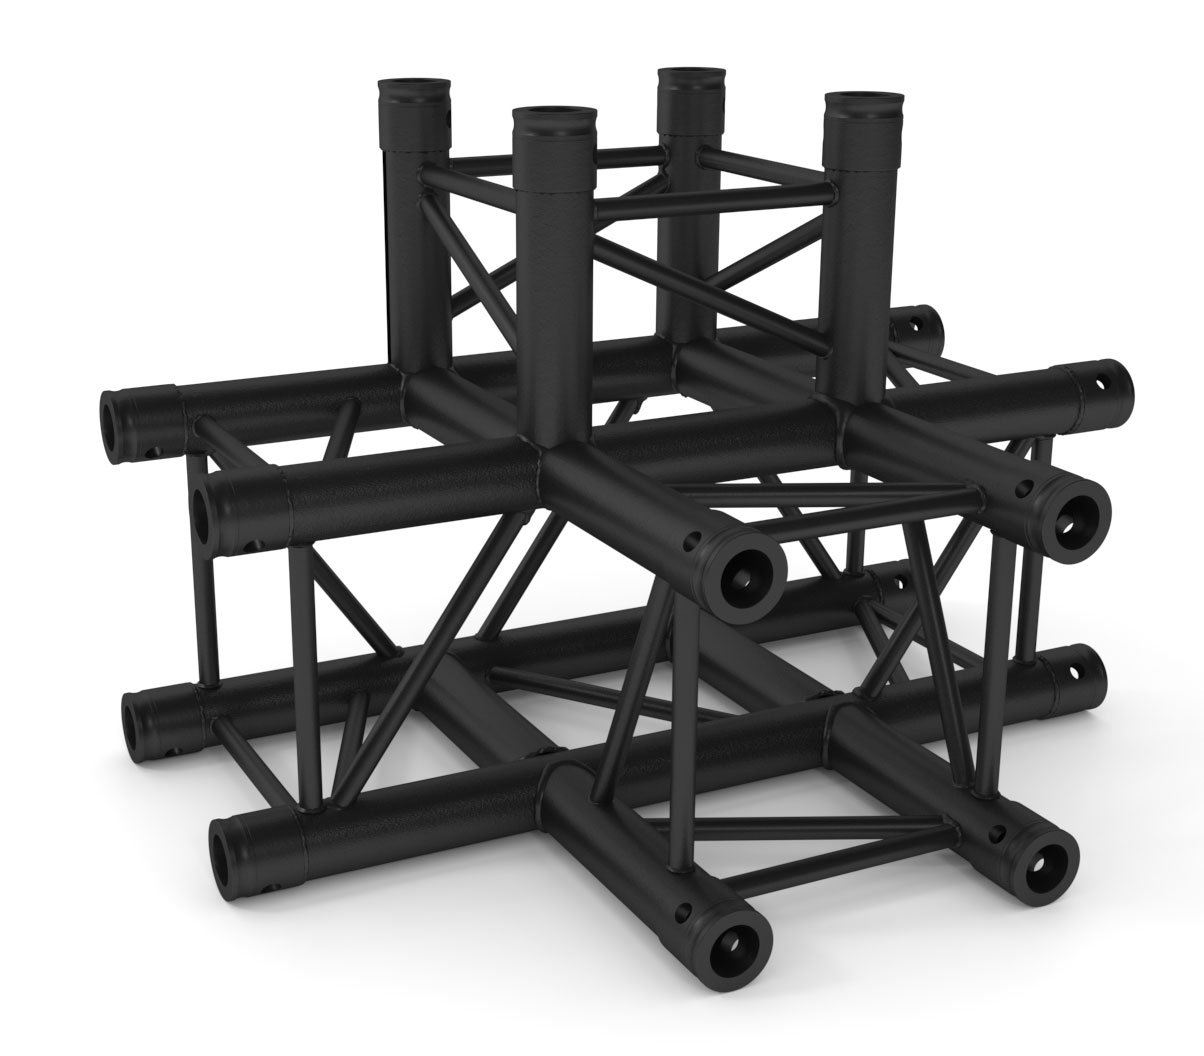 TRUSS Quatro 290 side piece - 90- - 4 directions - black - Connection kits included